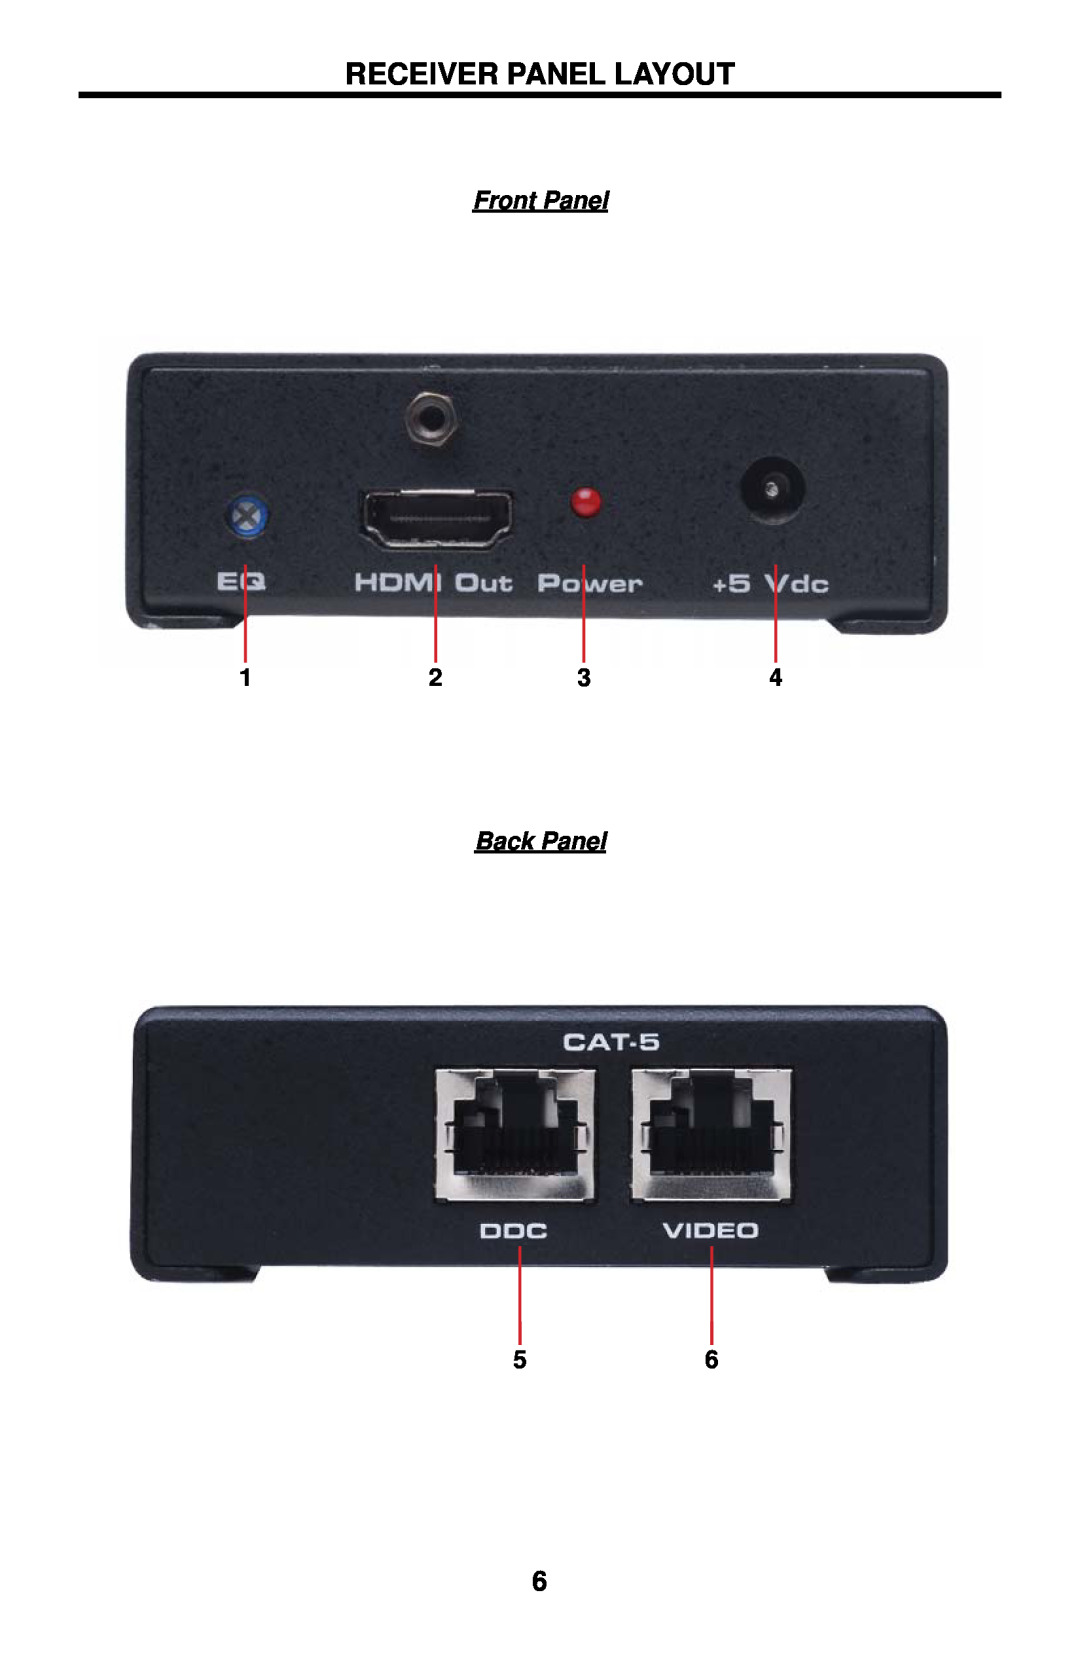 Gefen EXT-HDMI-CAT5-145 user manual Receiver Panel Layout, Front Panel, Back Panel 